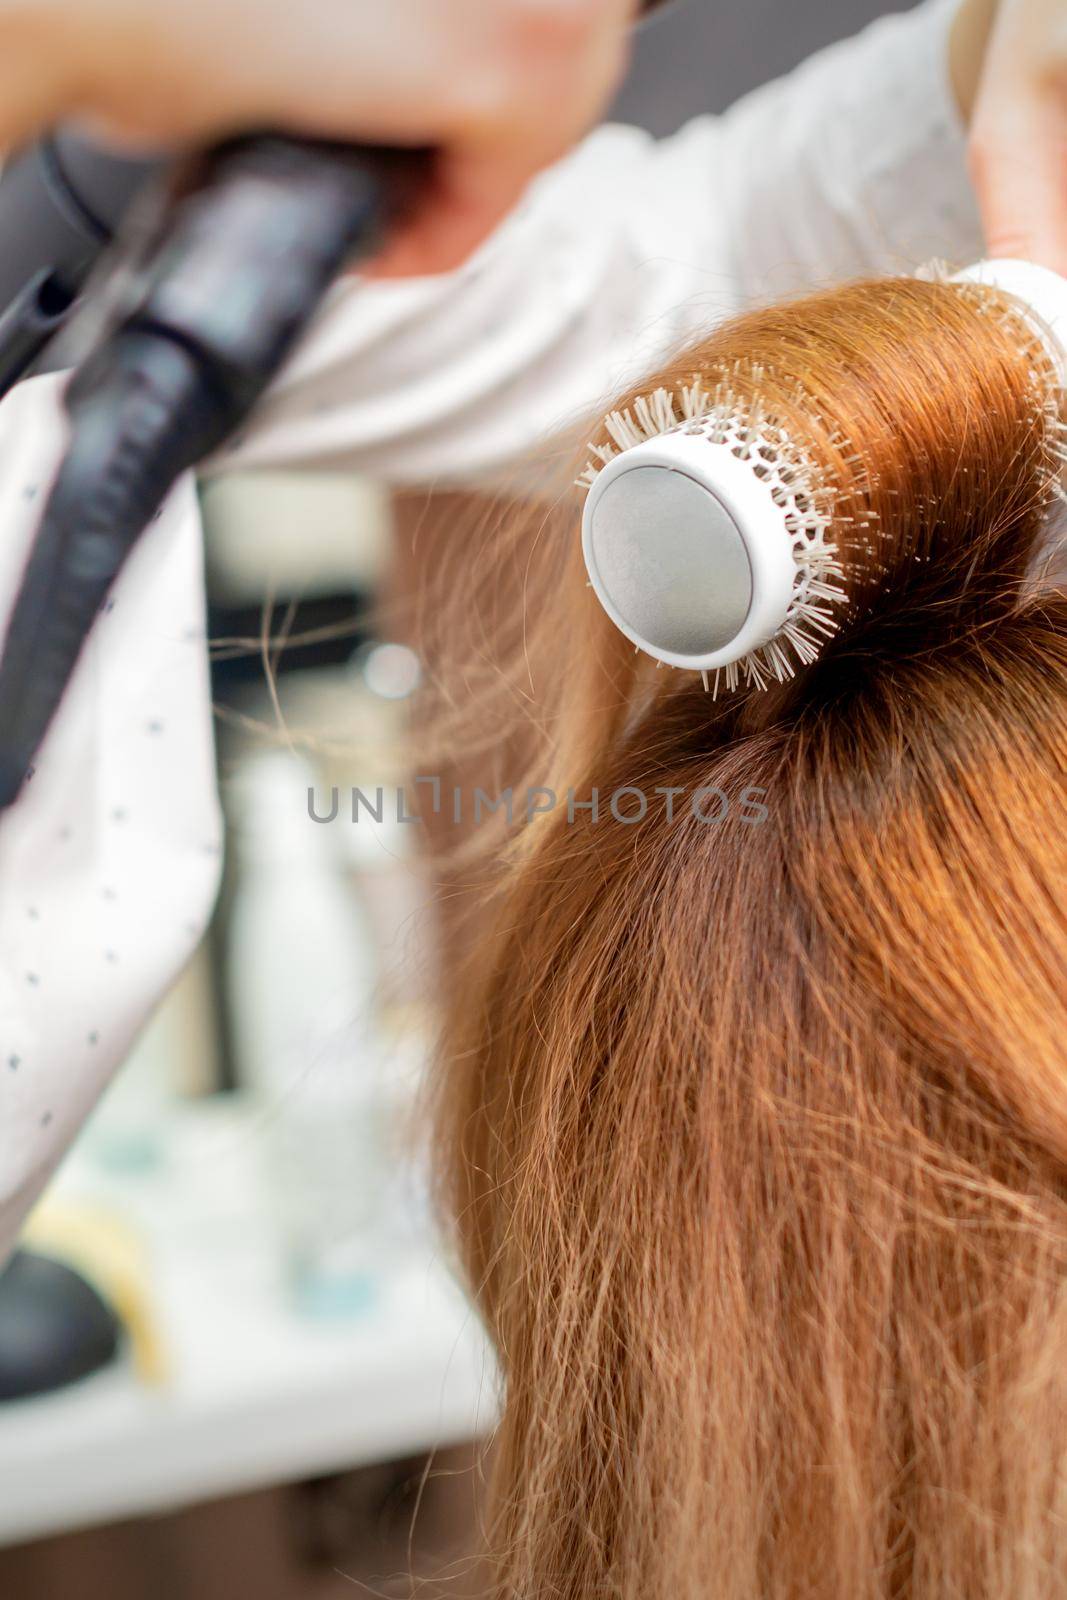 Drying red hair with a hairdryer and round brush, close up. by okskukuruza